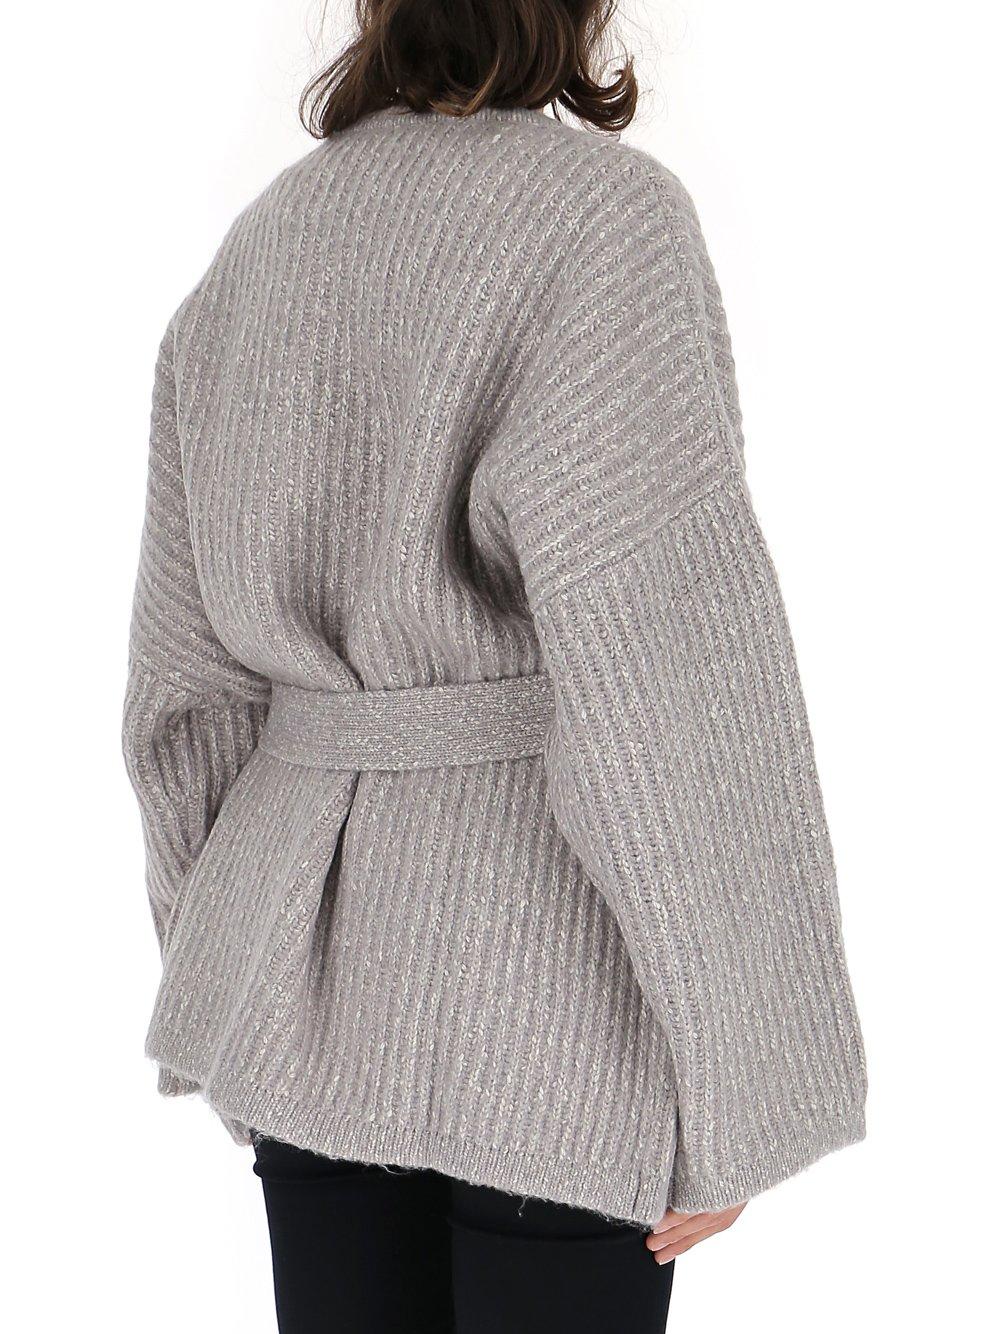 See By Chloé Oversize Belted Cardigan in Gray | Lyst